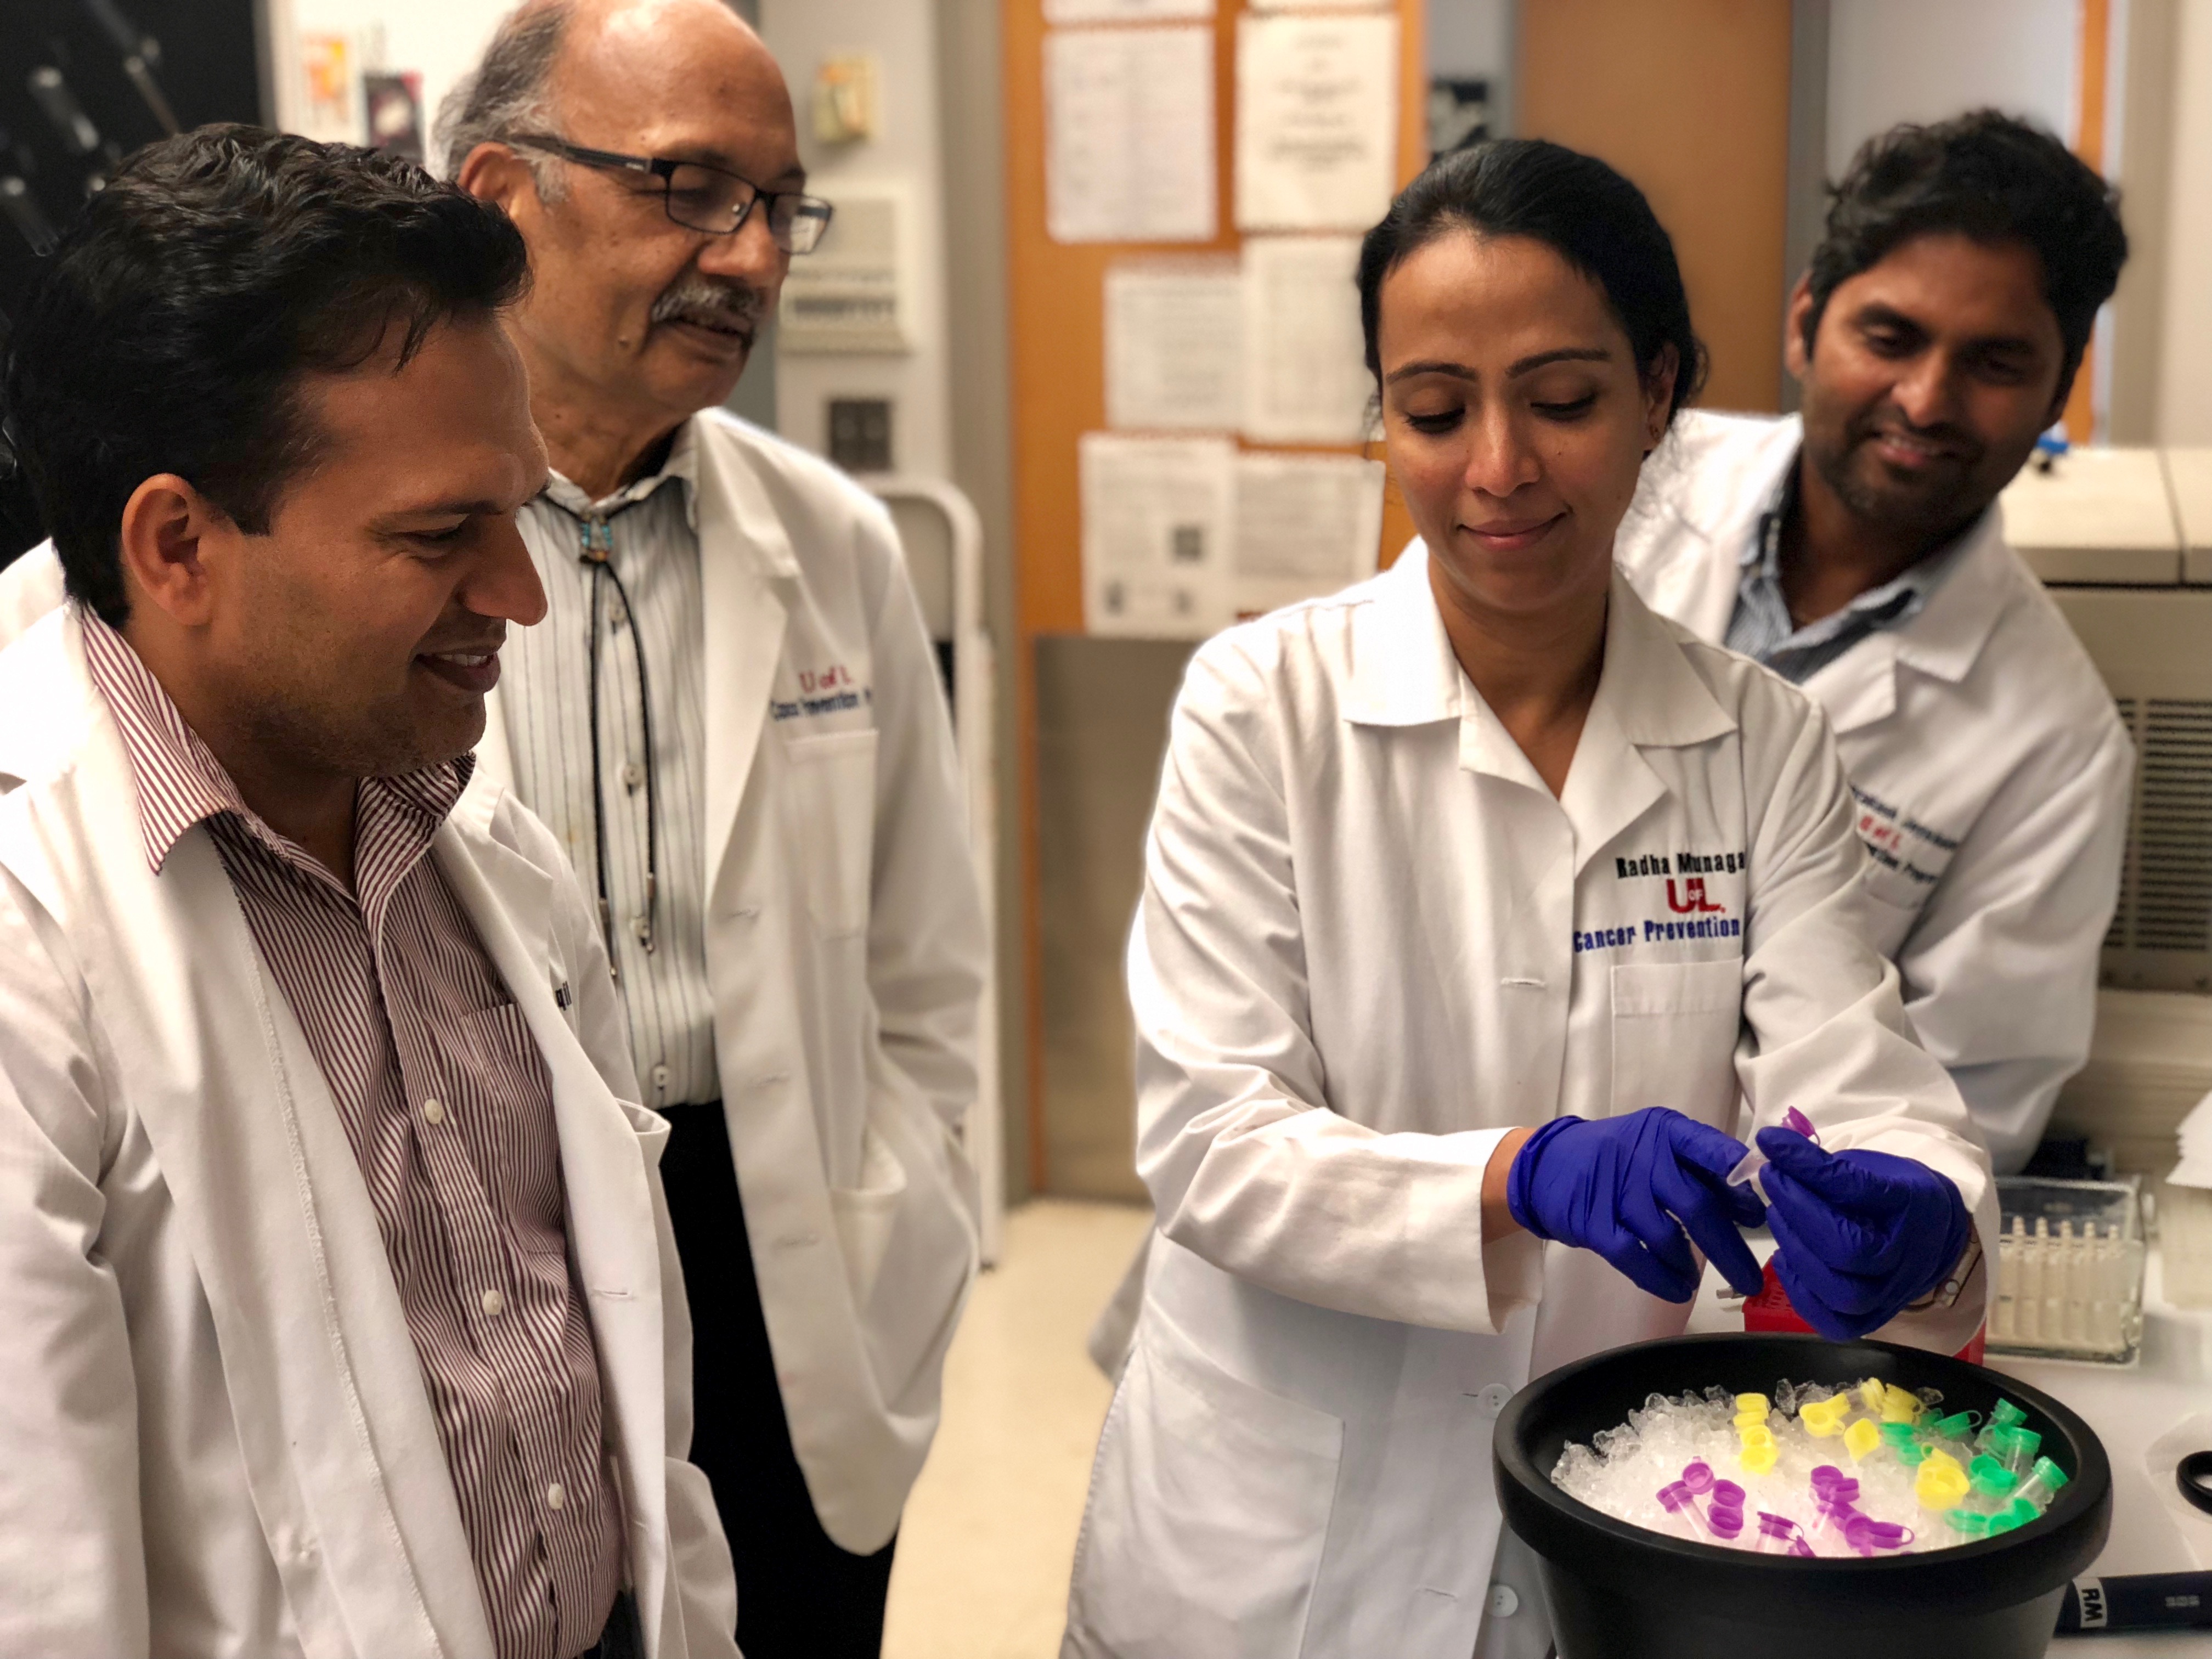 A milk exosome-drug delivery tool, invented by UofL’s Dr. Ramesh Gupta and his team members, Drs. Radha Munagala, Dr. Farrukh Aqil and Jeyaprakash Jeyabalan, could improve how humans absorb drugs meant to treat disease and relive pain.